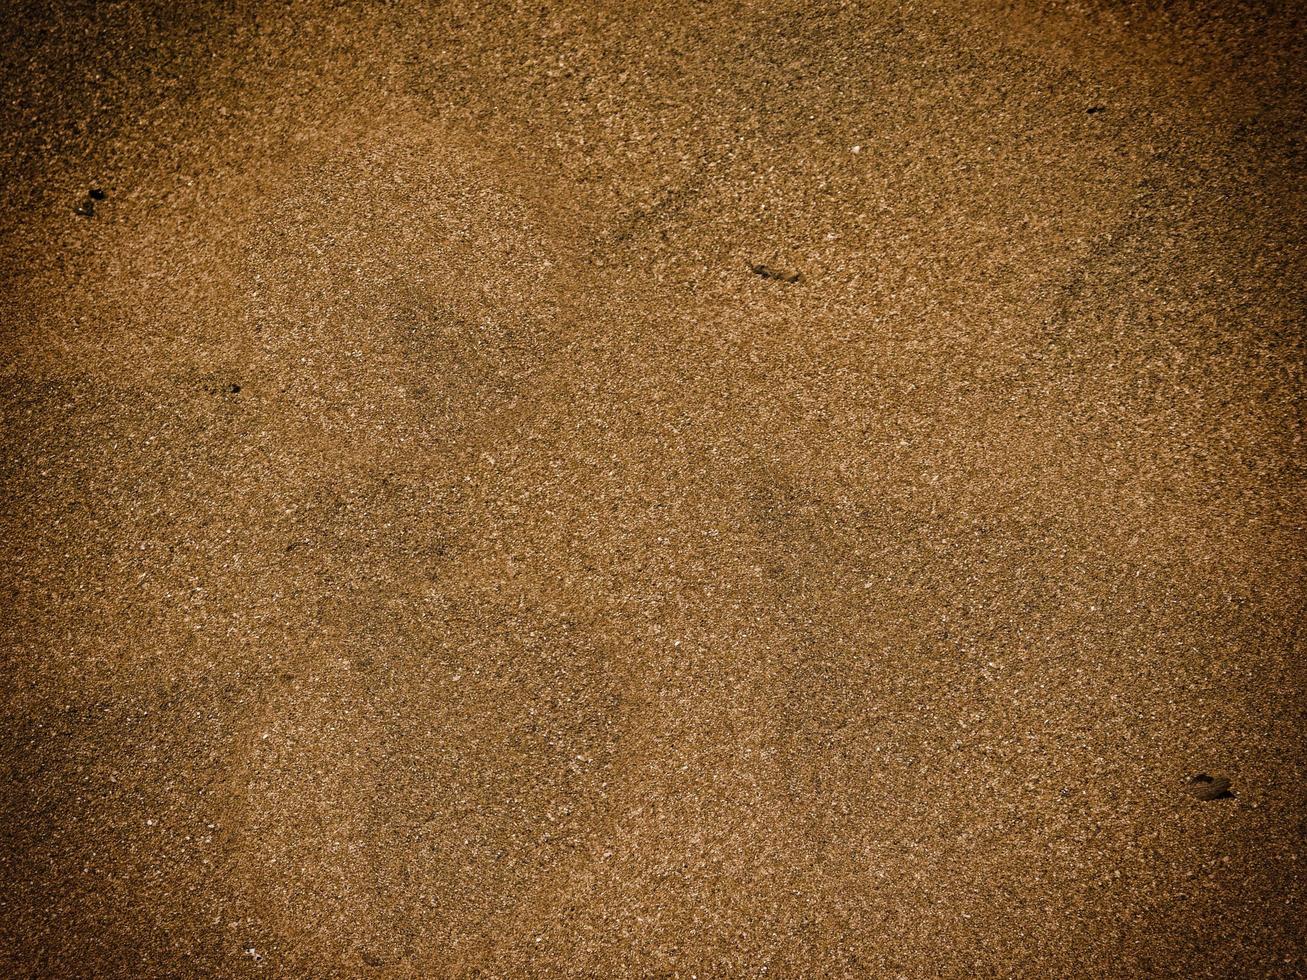 Patch of sand for background or texture 2199960 Stock Photo at Vecteezy